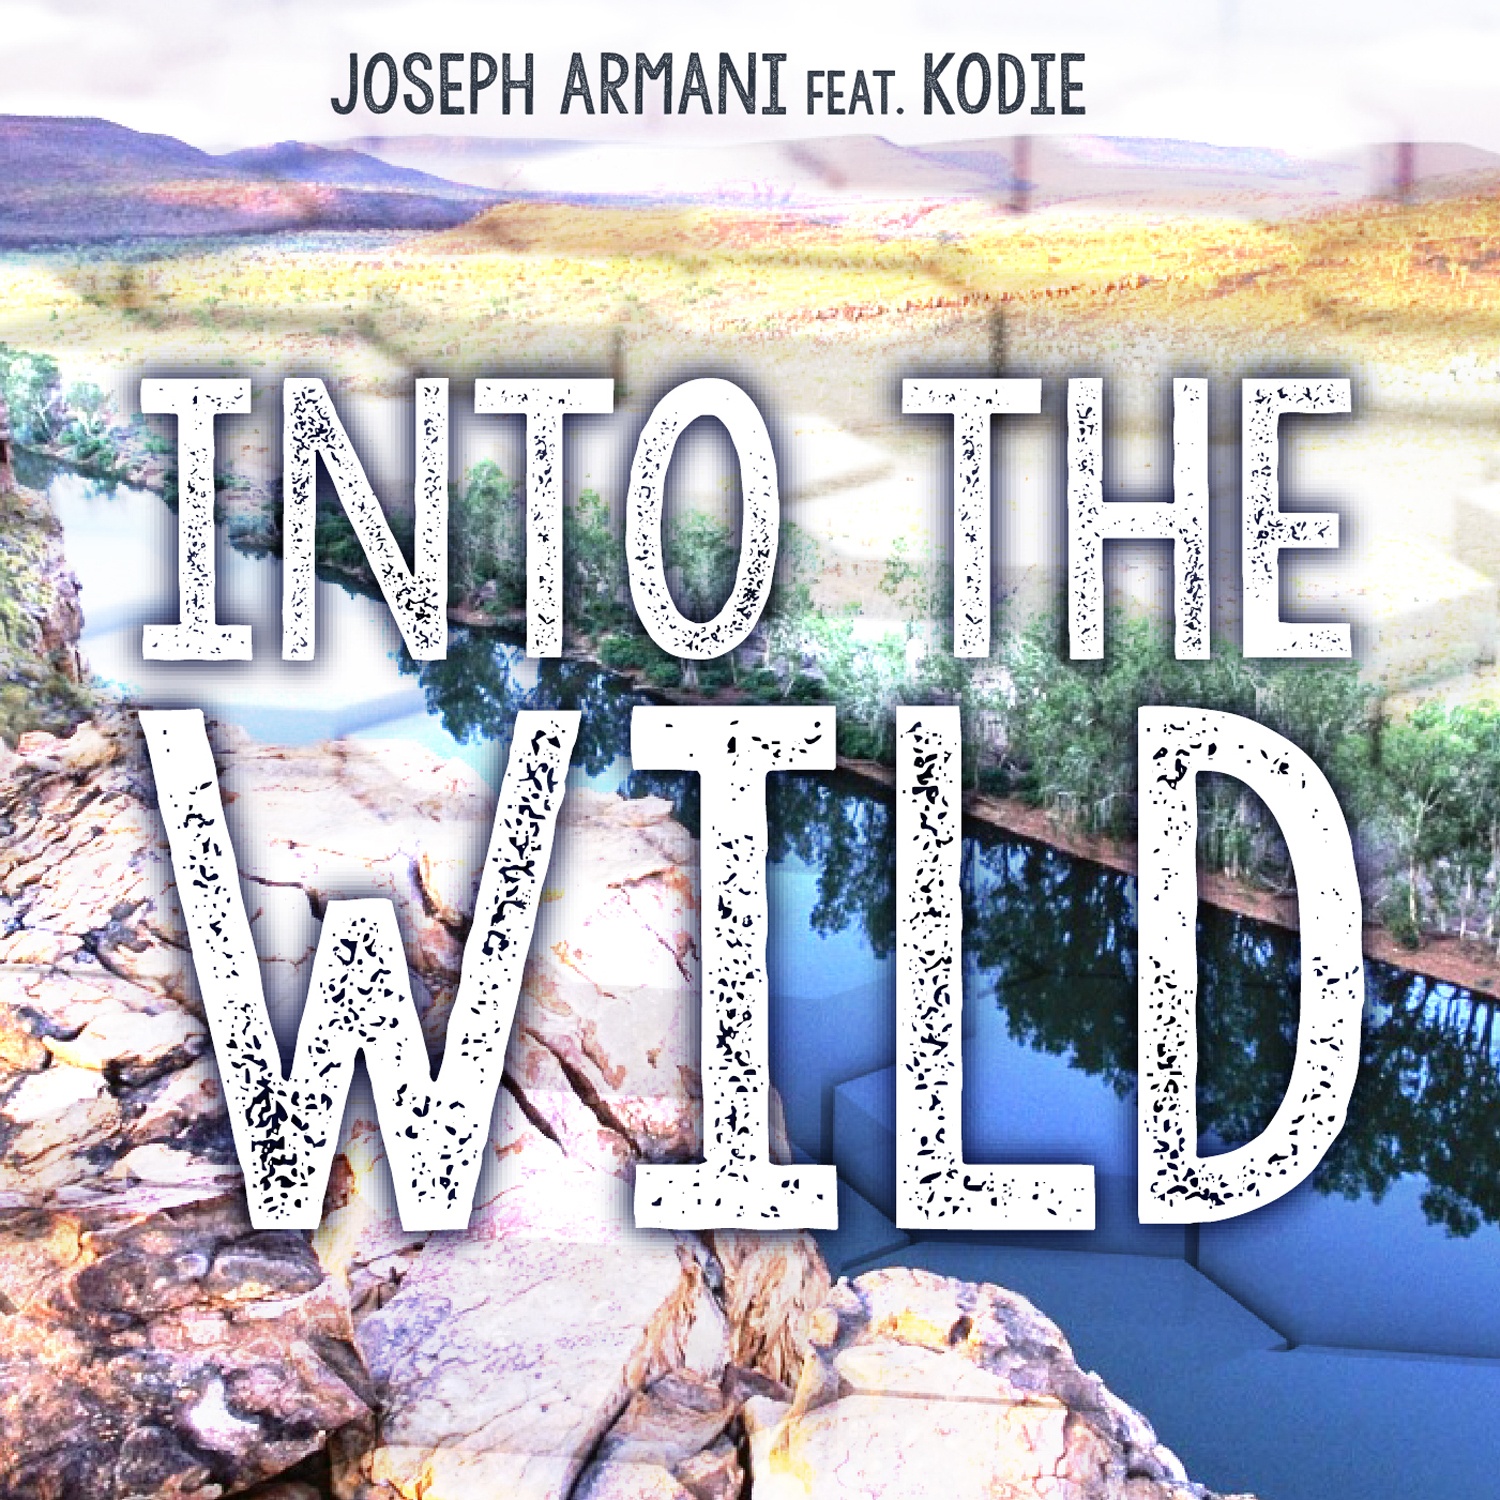 Into The Wild (Extended Mix)